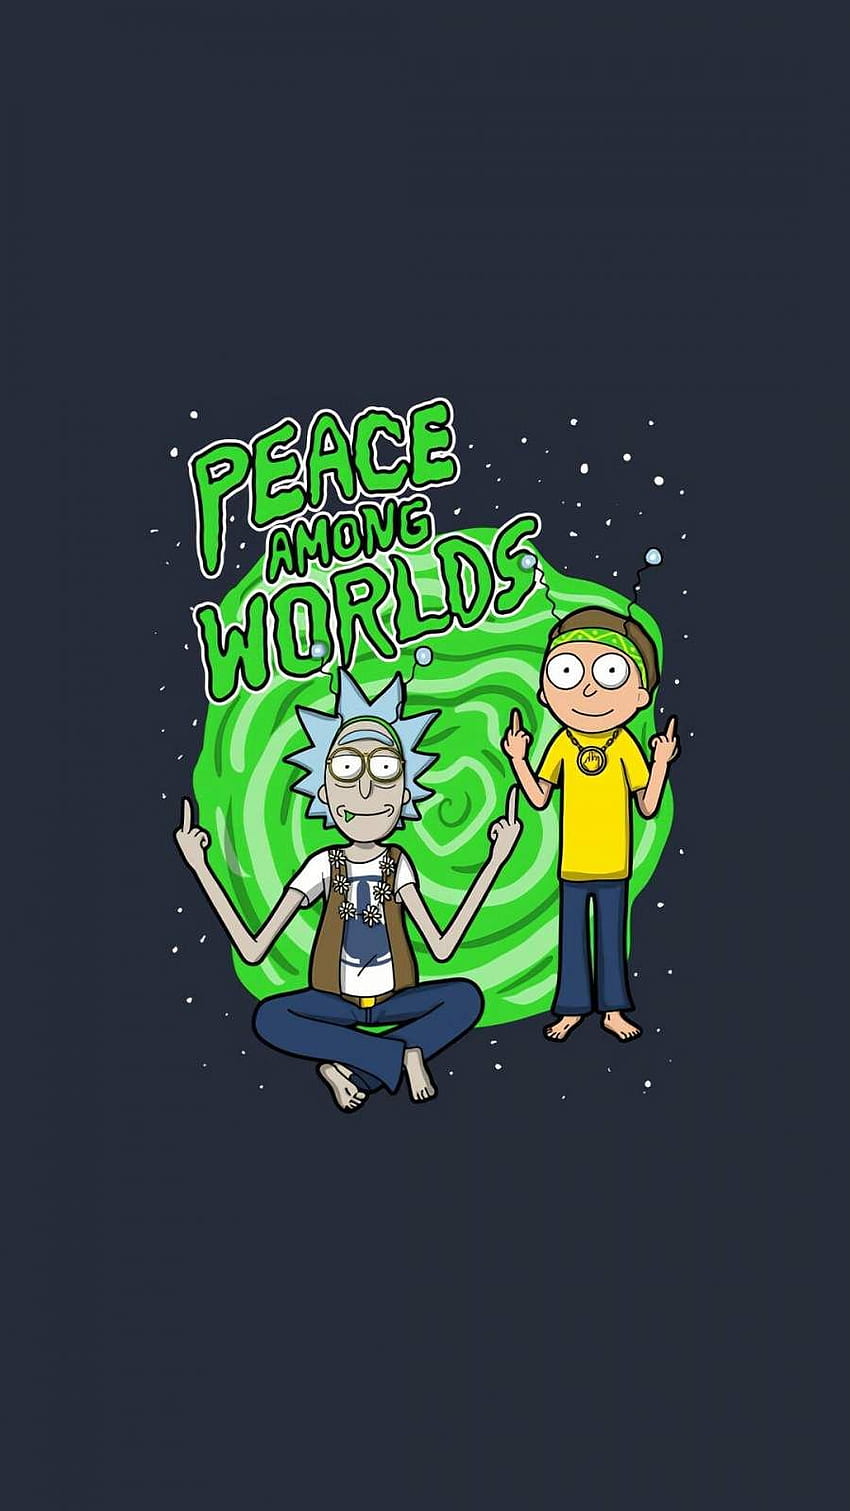 Green Screen Rick and Morty Tattoo Makes Tattoo Comes Alive  SHOUTS